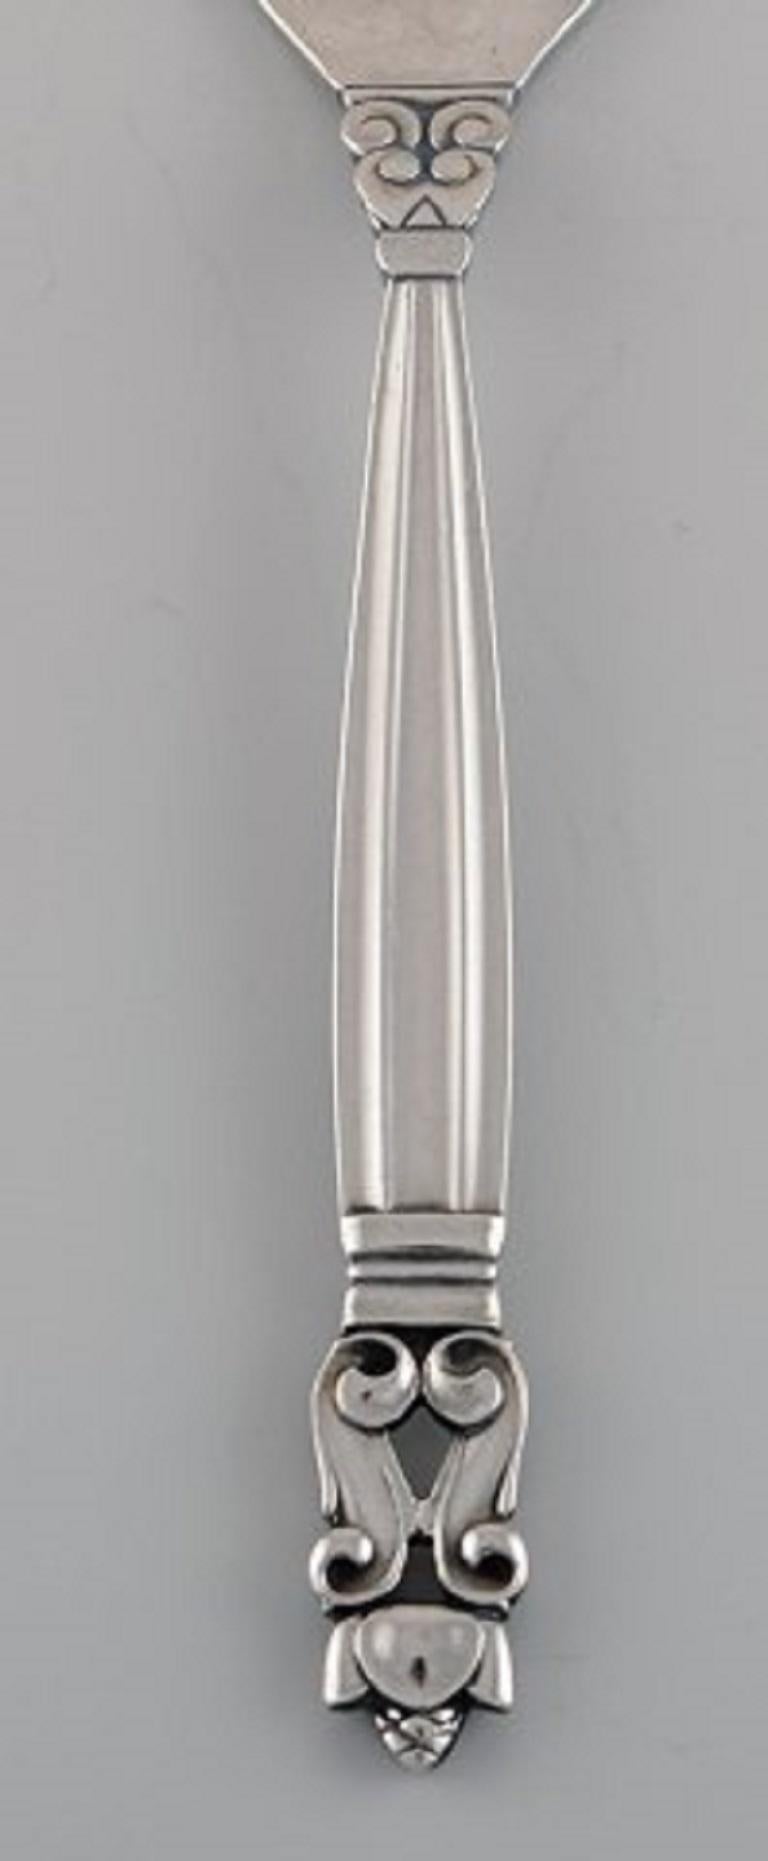 Georg Jensen Acorn fish fork in sterling silver.
Measures: Length 16.5 cm.
Stamped.
In excellent condition.
Our skilled Georg Jensen silversmith or jeweler can polish all silver and gold so that it appears as new. The price is very reasonable.